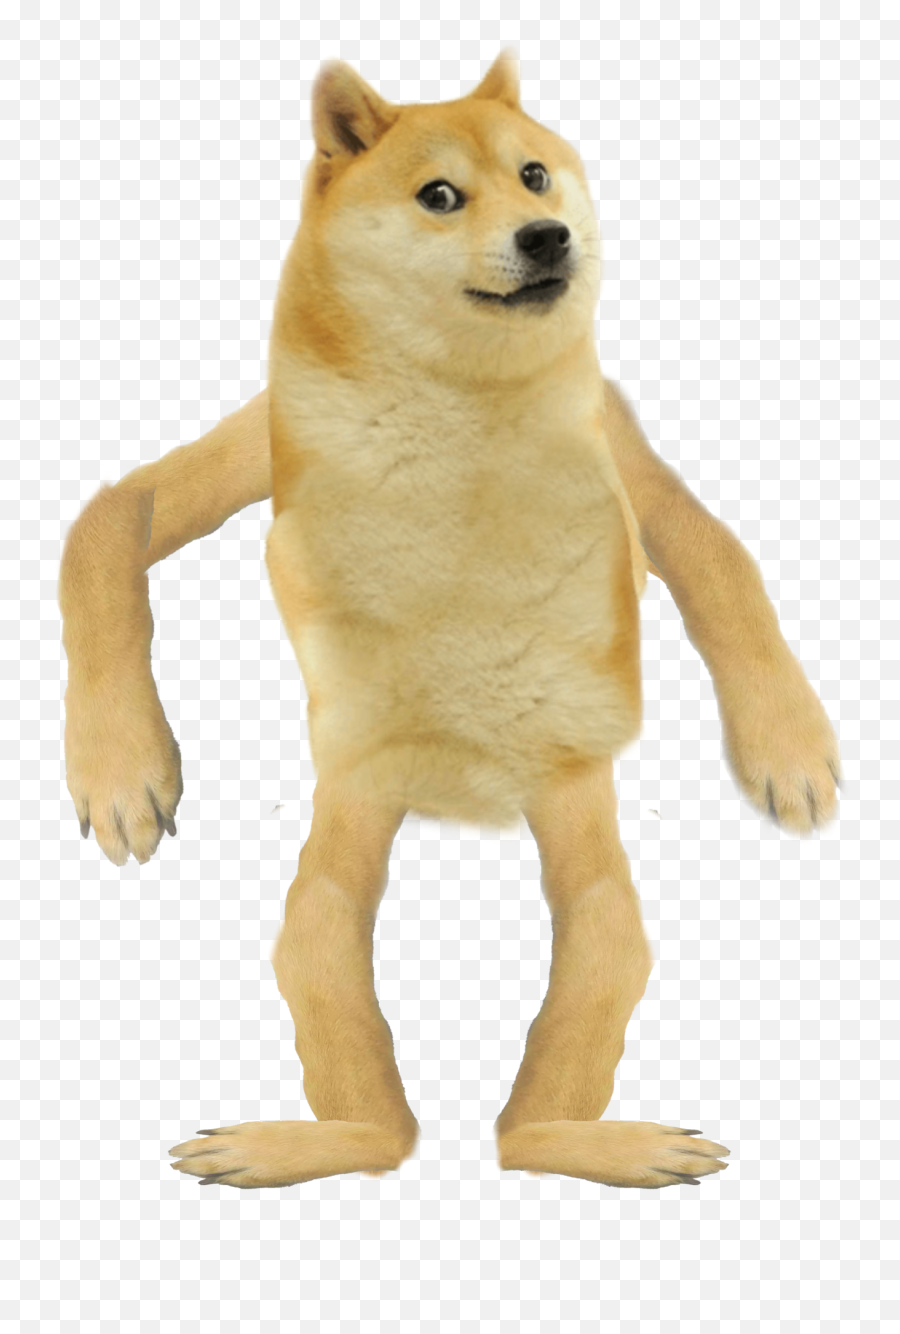 Abomination - Dogelore Pngs,Doge Png